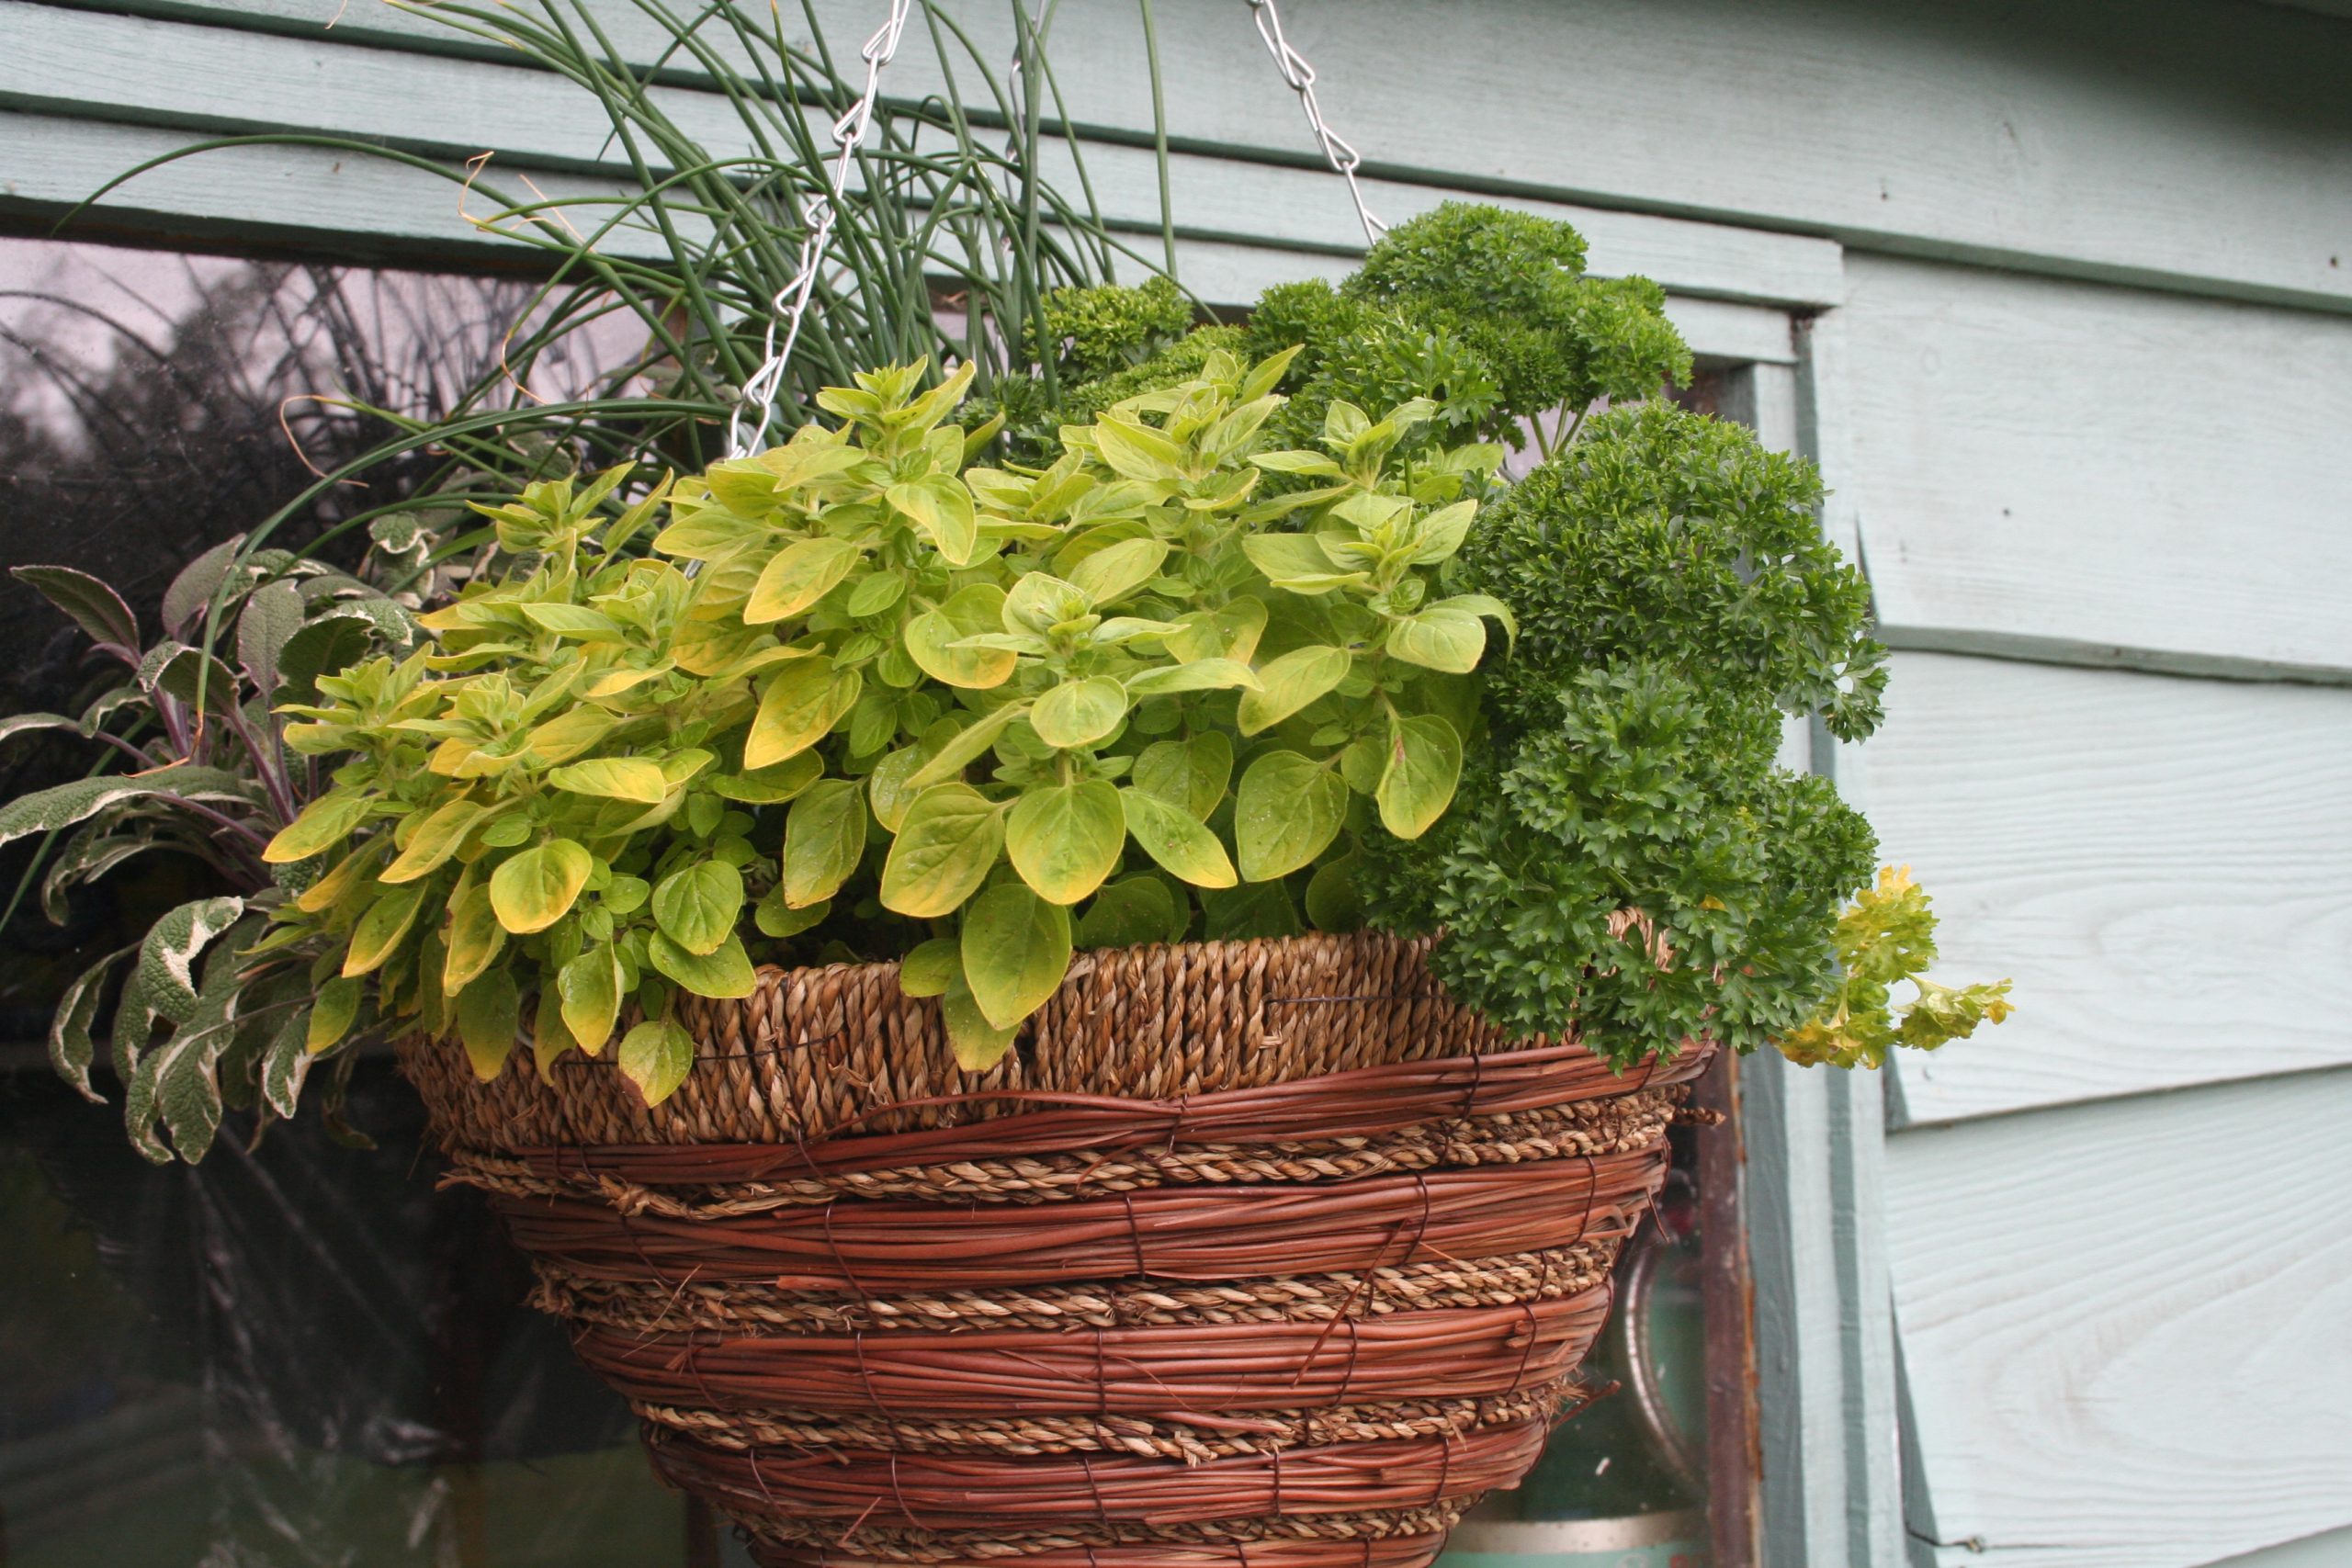 Herbs for containers and hanging baskets